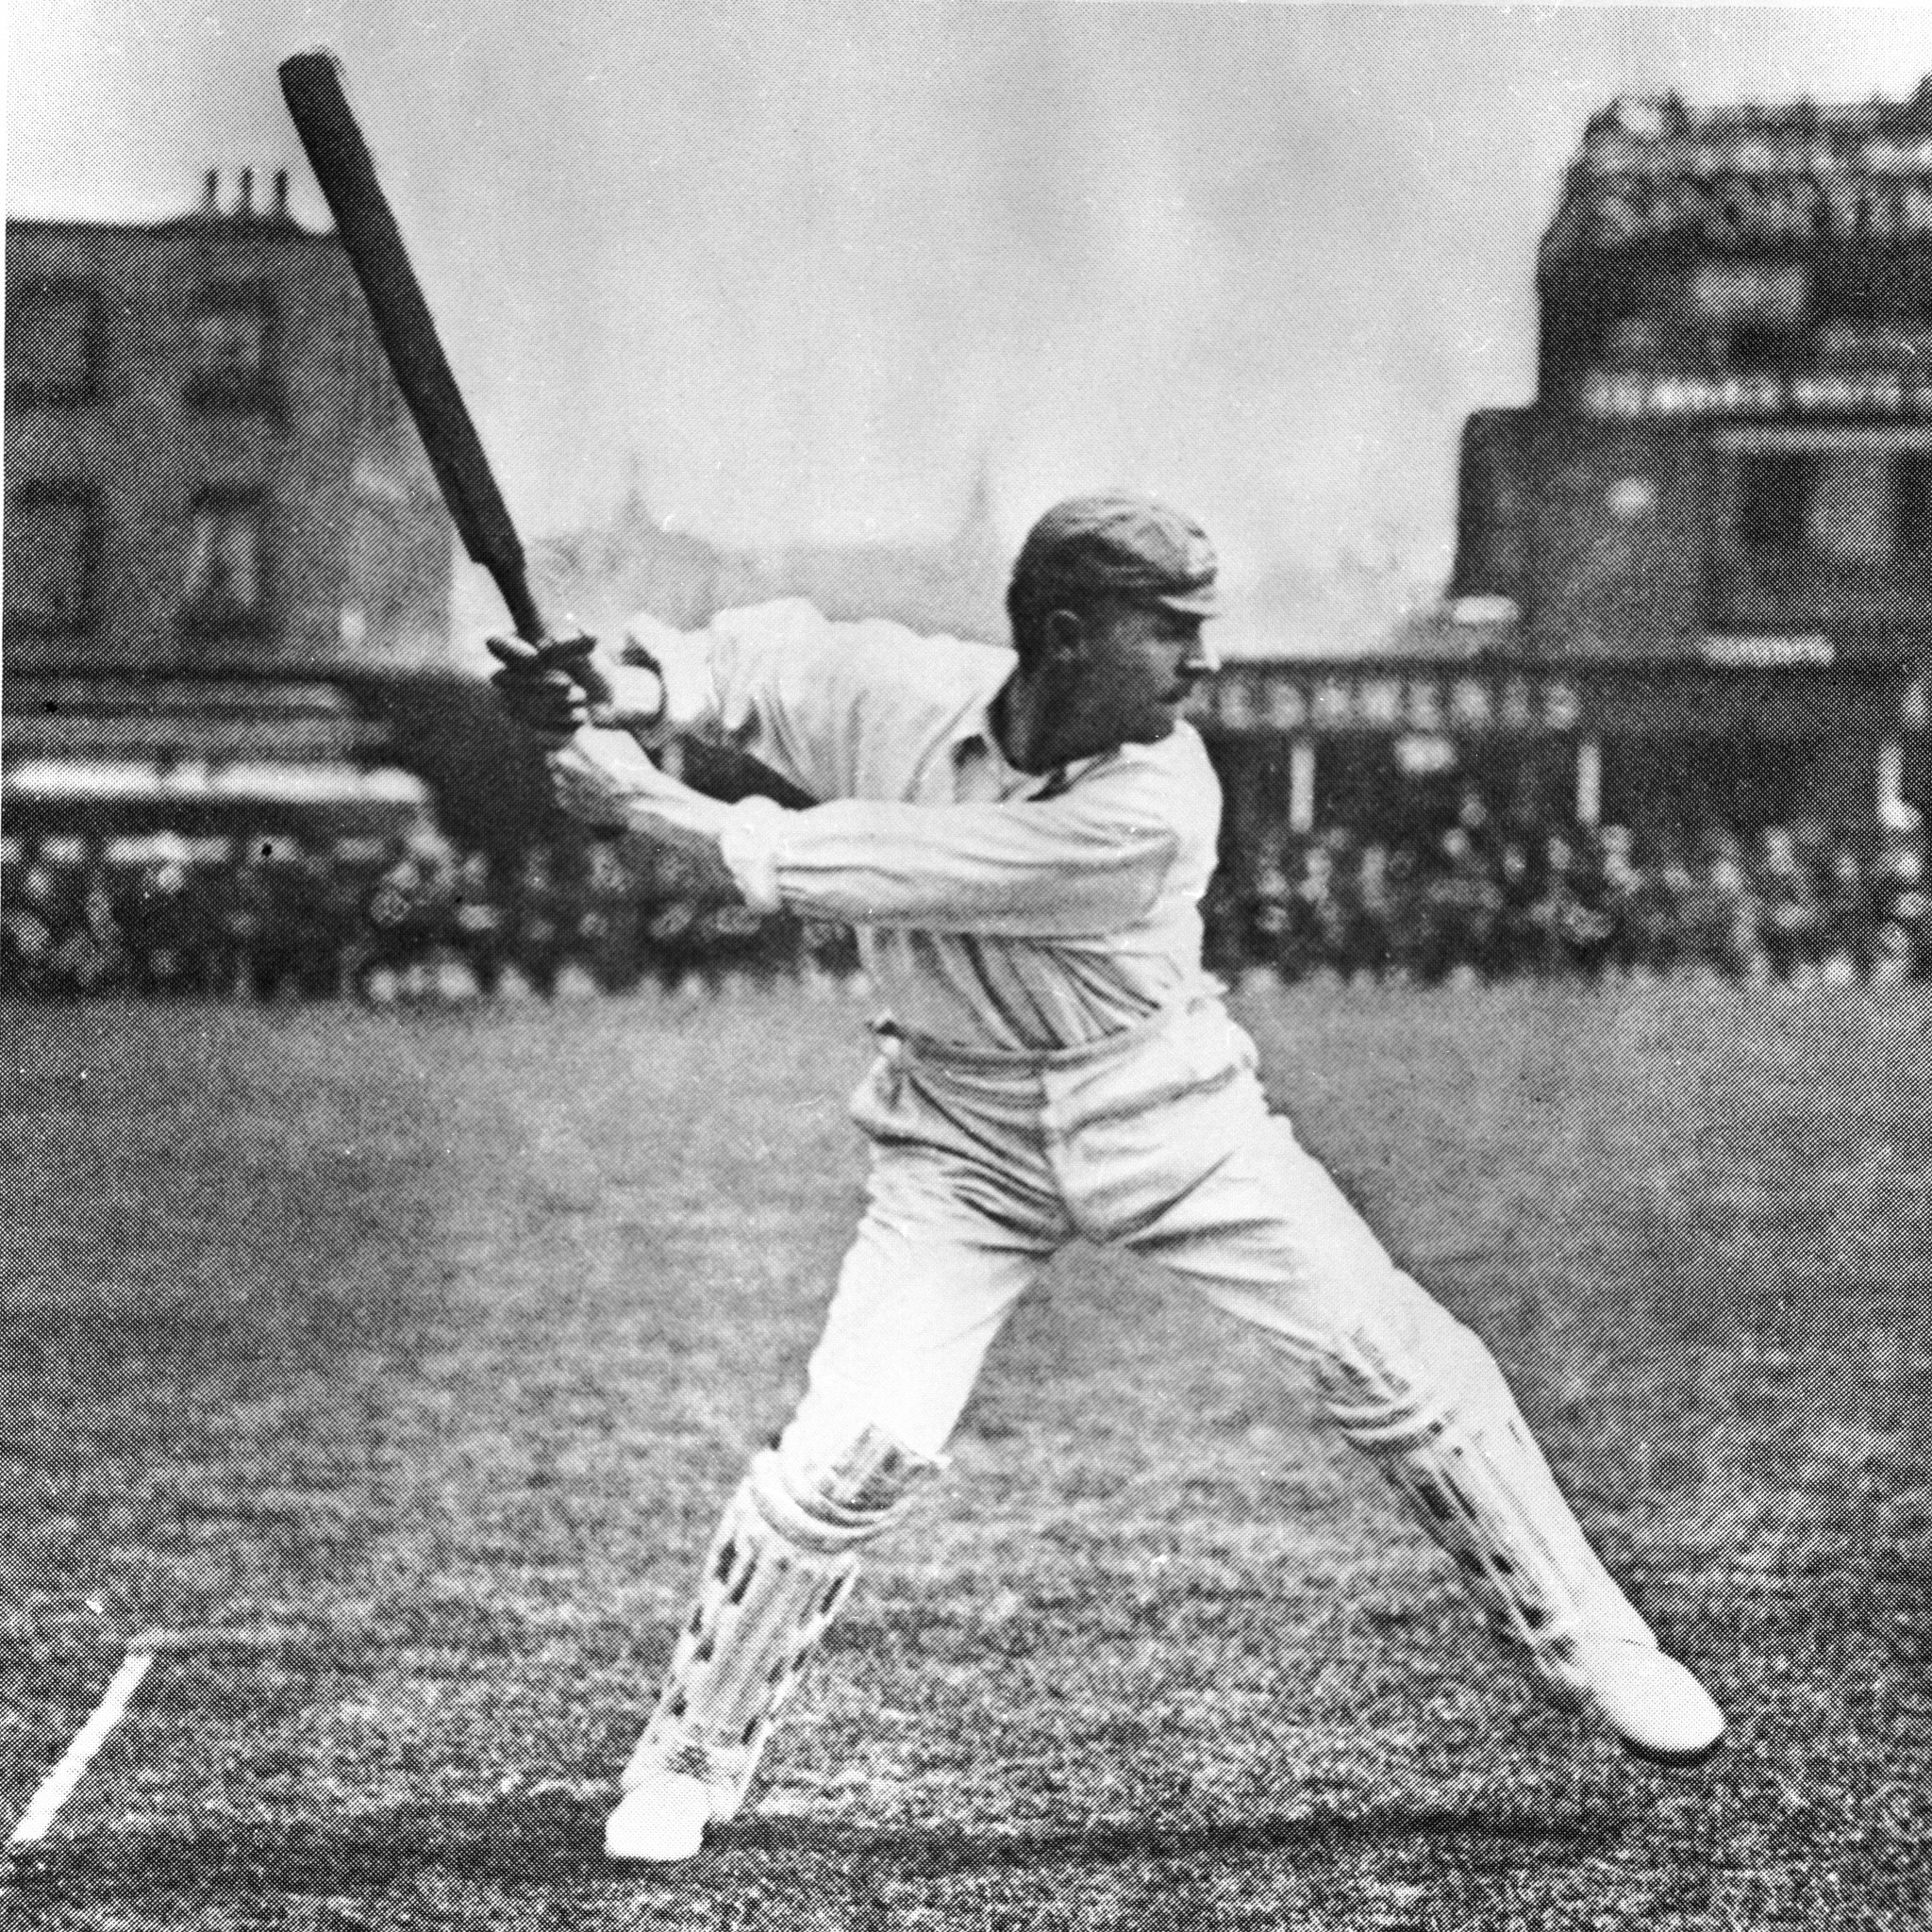 Victor Trumper was an Australian cricketer known as the most stylish and versatile batsman of his age ©Getty Images